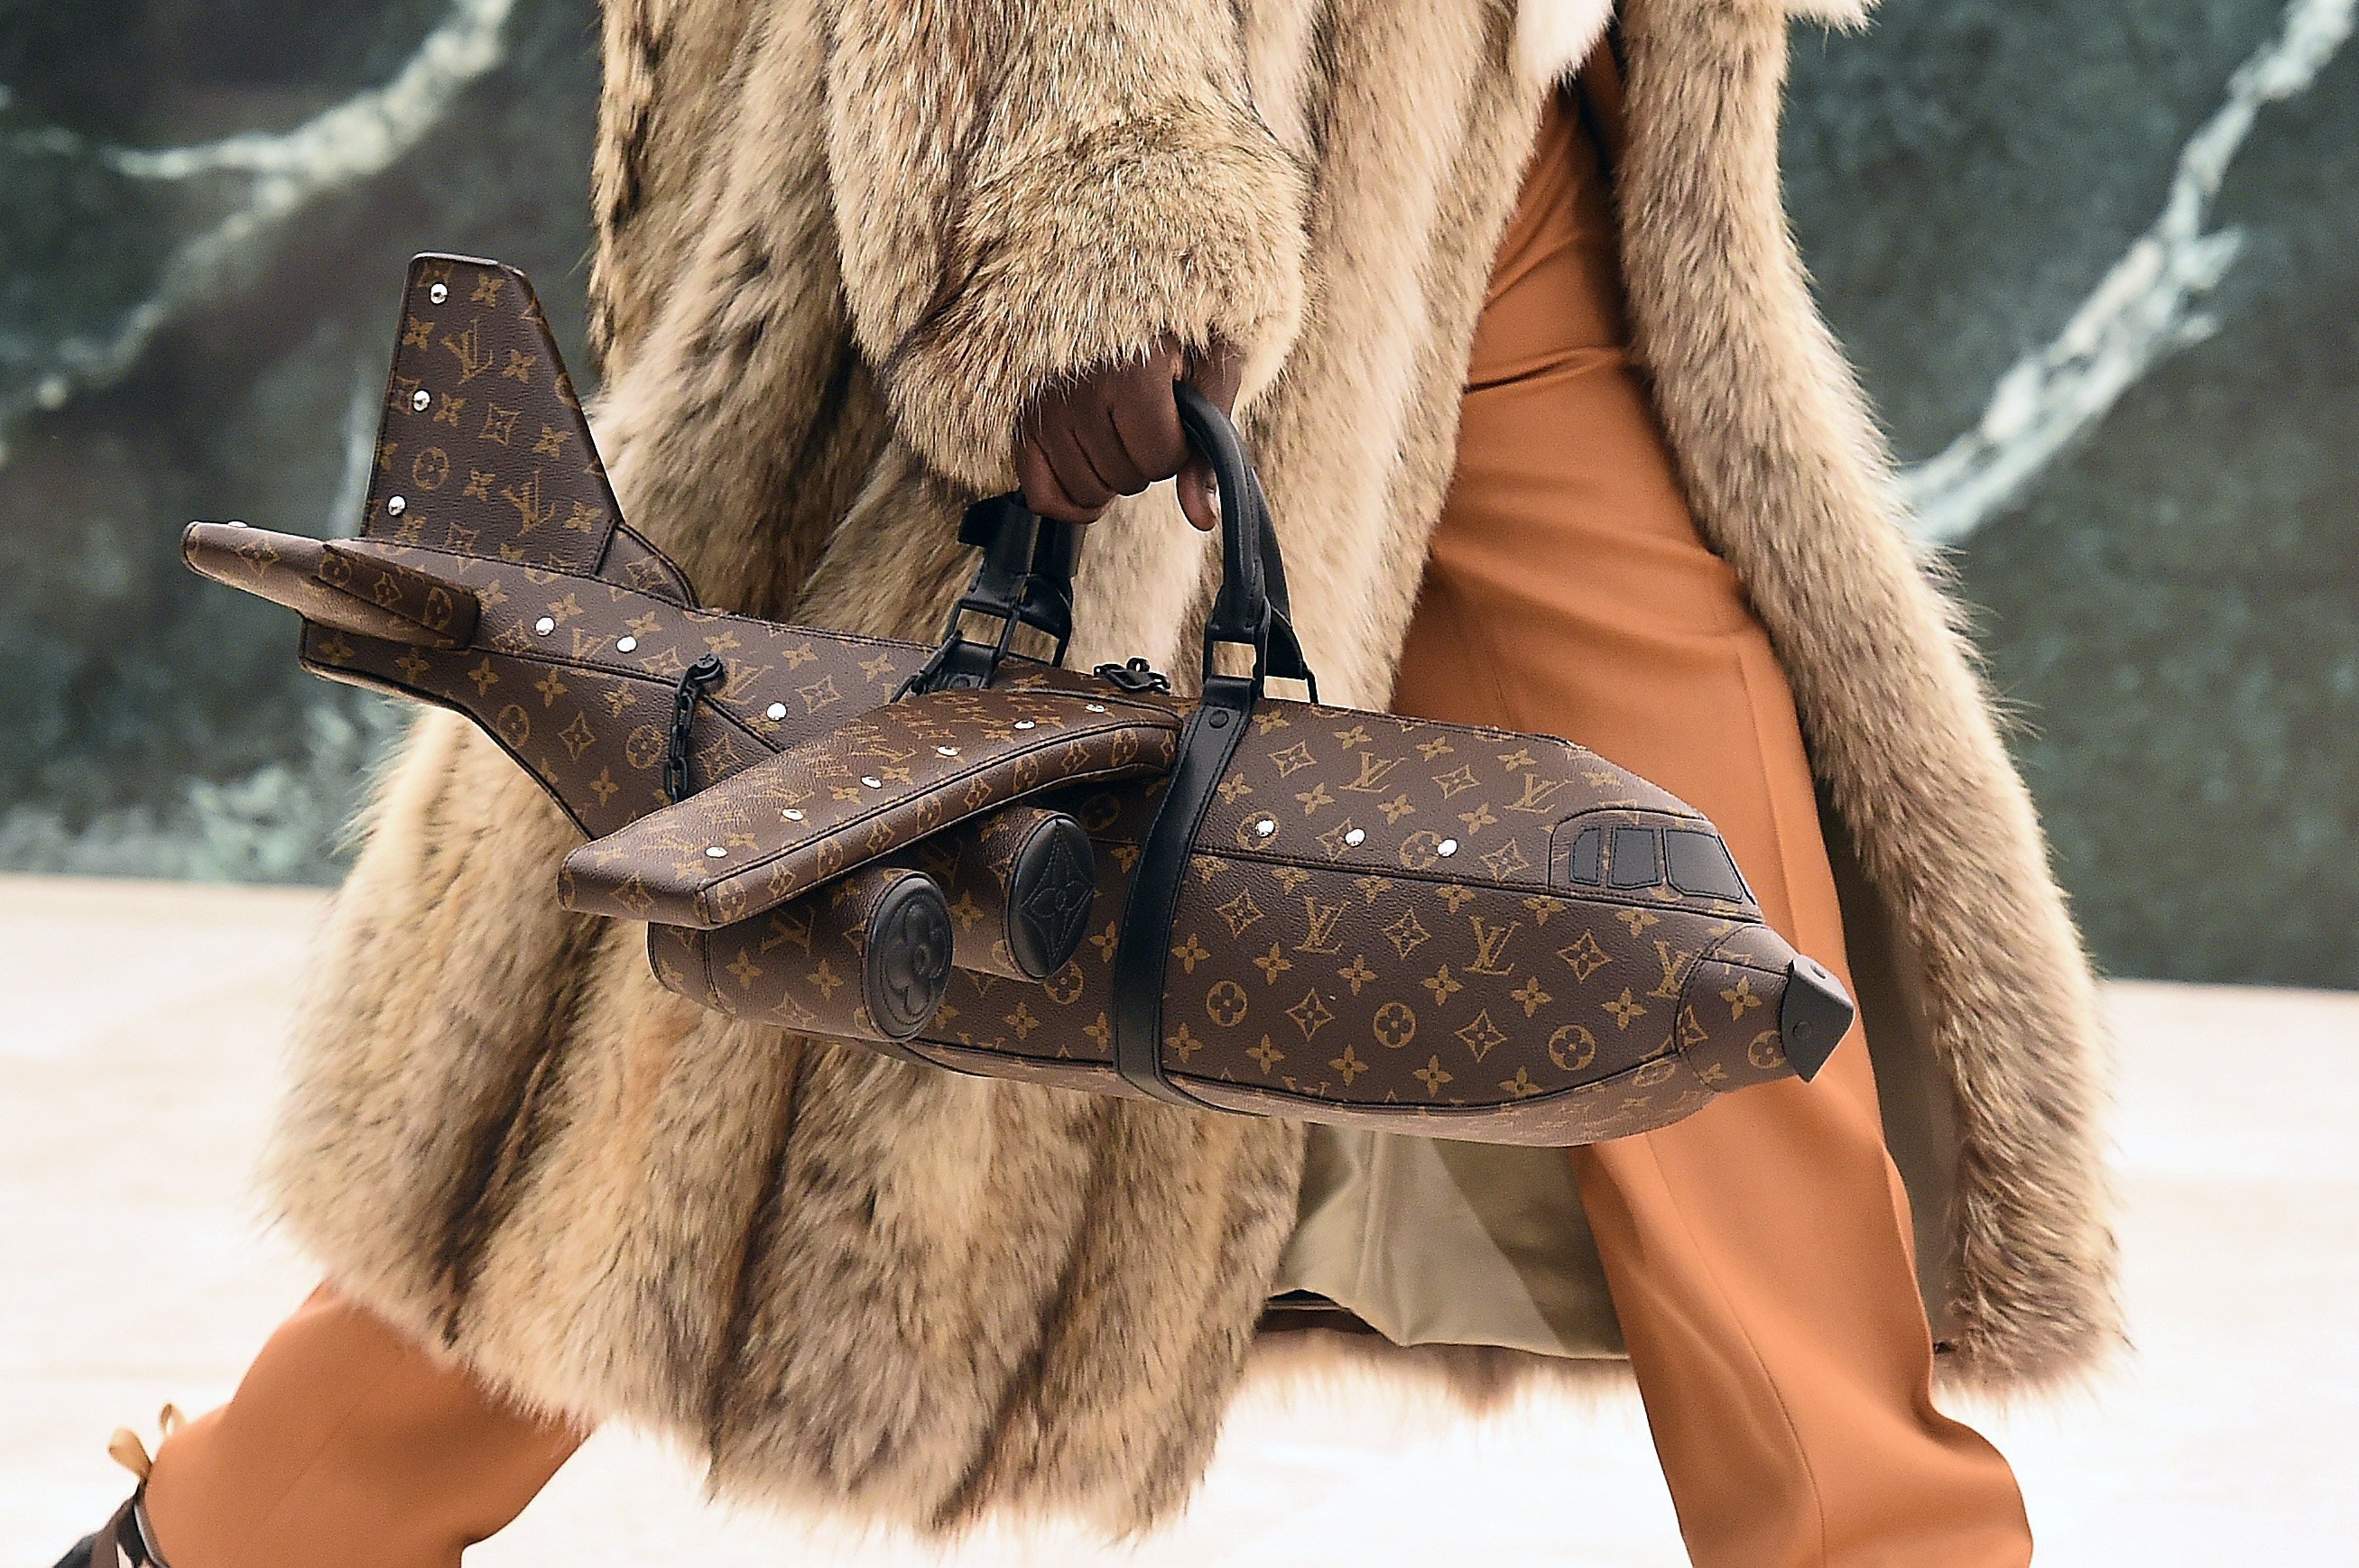 Louis Vuitton's US$39,000 airplane bag goes viral as designers have fun  with accessories